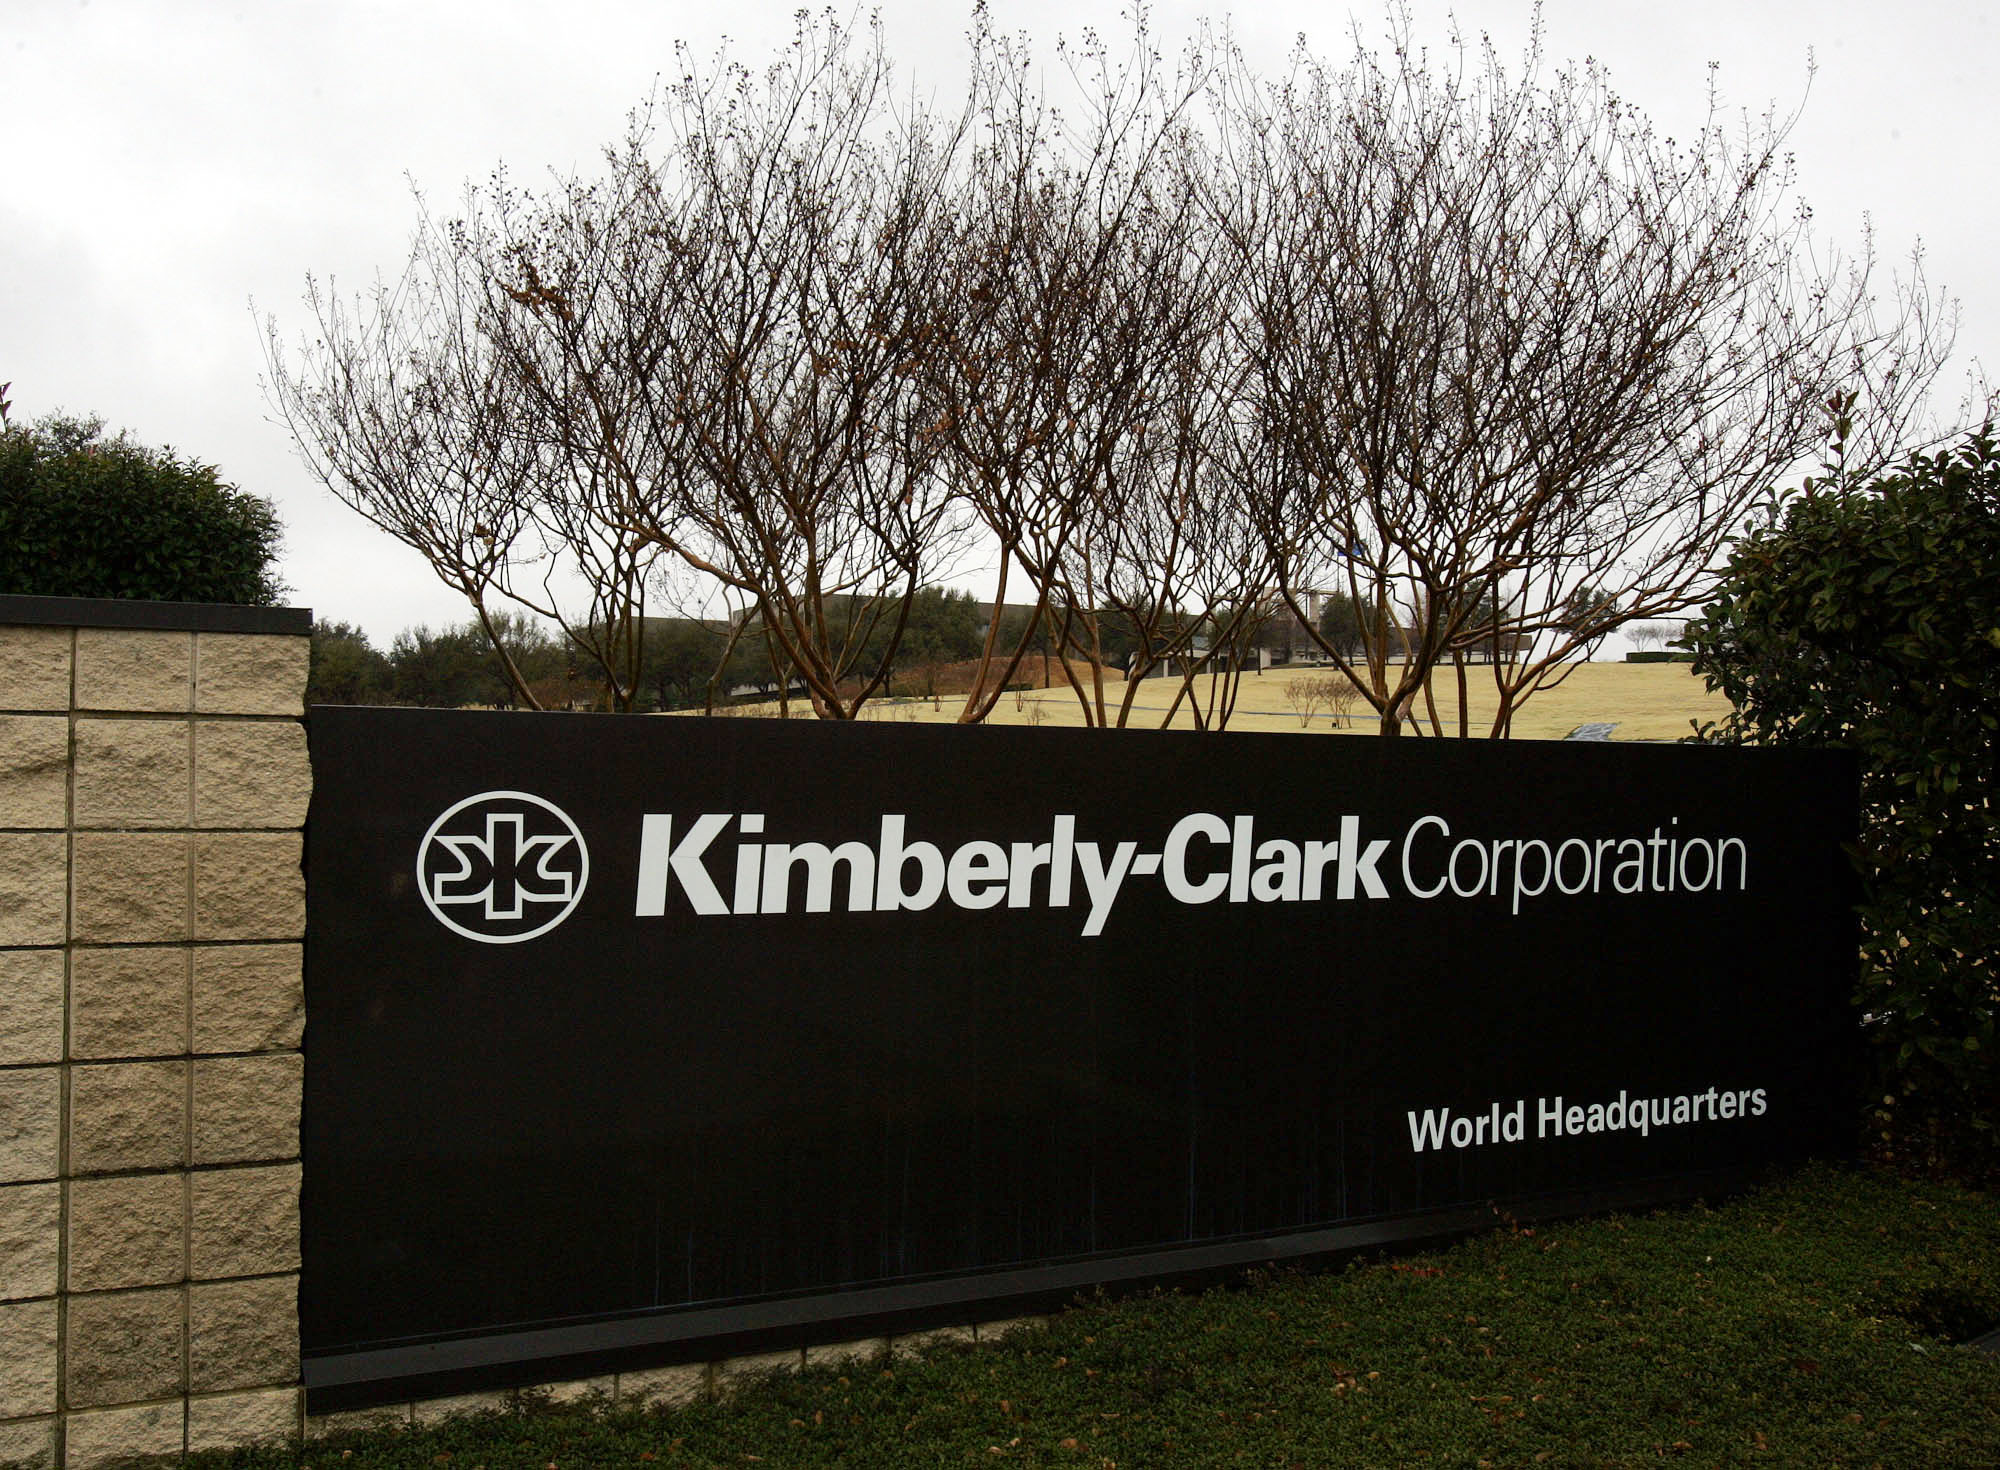 Local Government, Business Leaders Praise Kimberly-Clark Deal